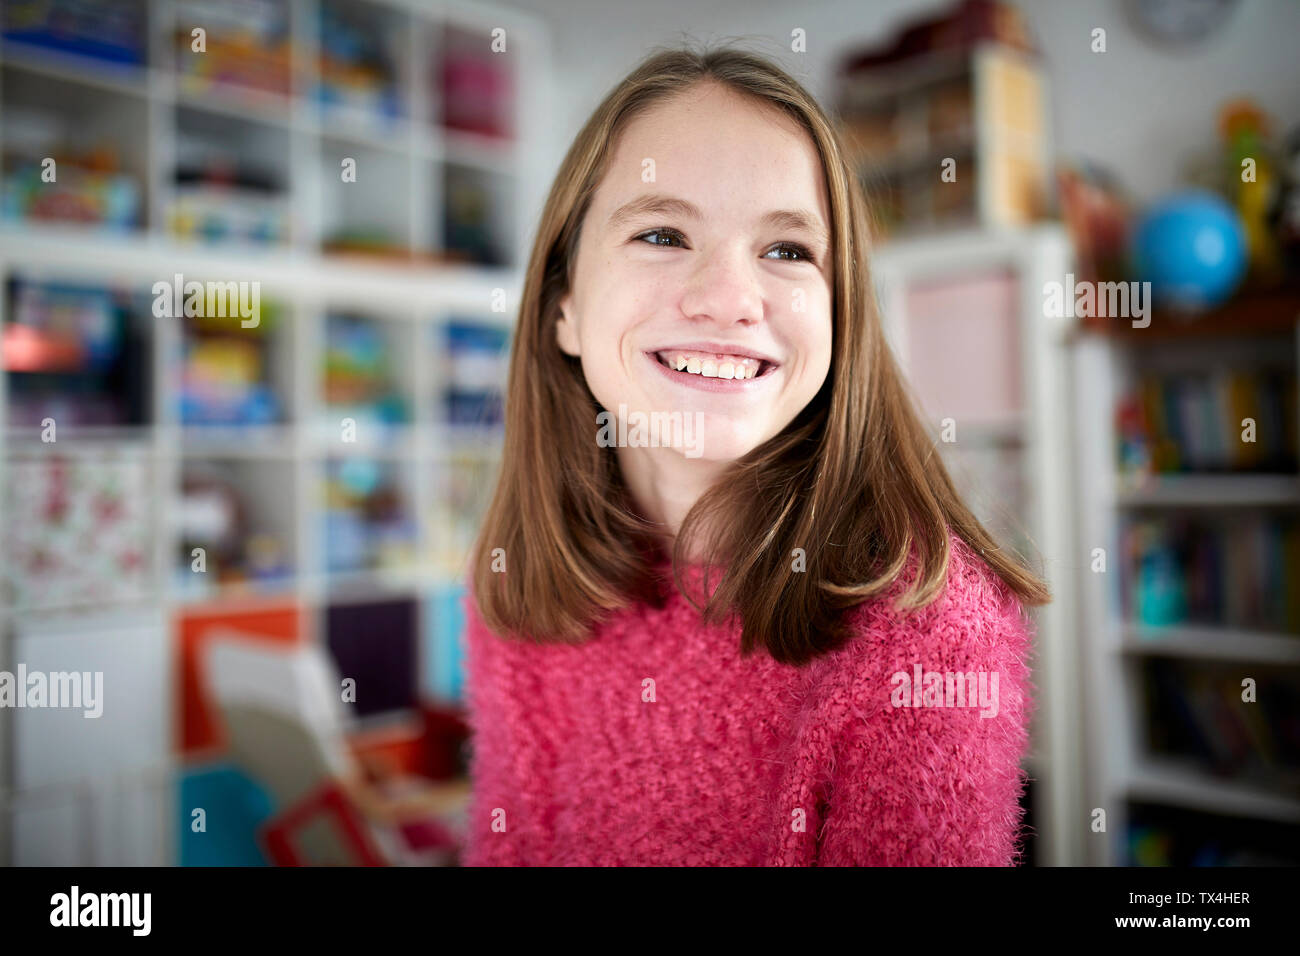 Portrait of a happy young girl Stock Photo